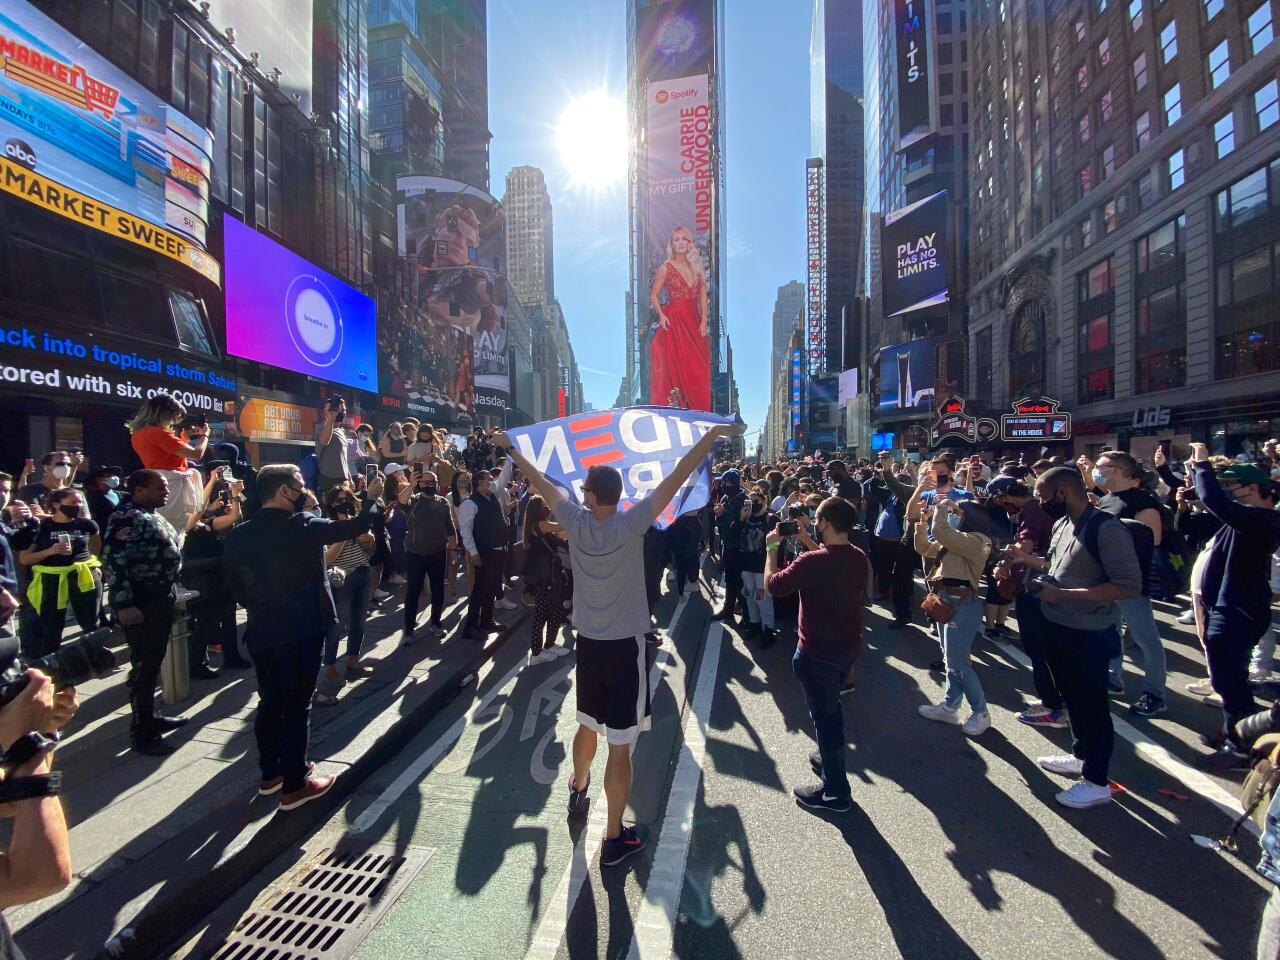 People celebrate at Times Square in New York after Joe Biden was declared winner of the 2020 presidential election.